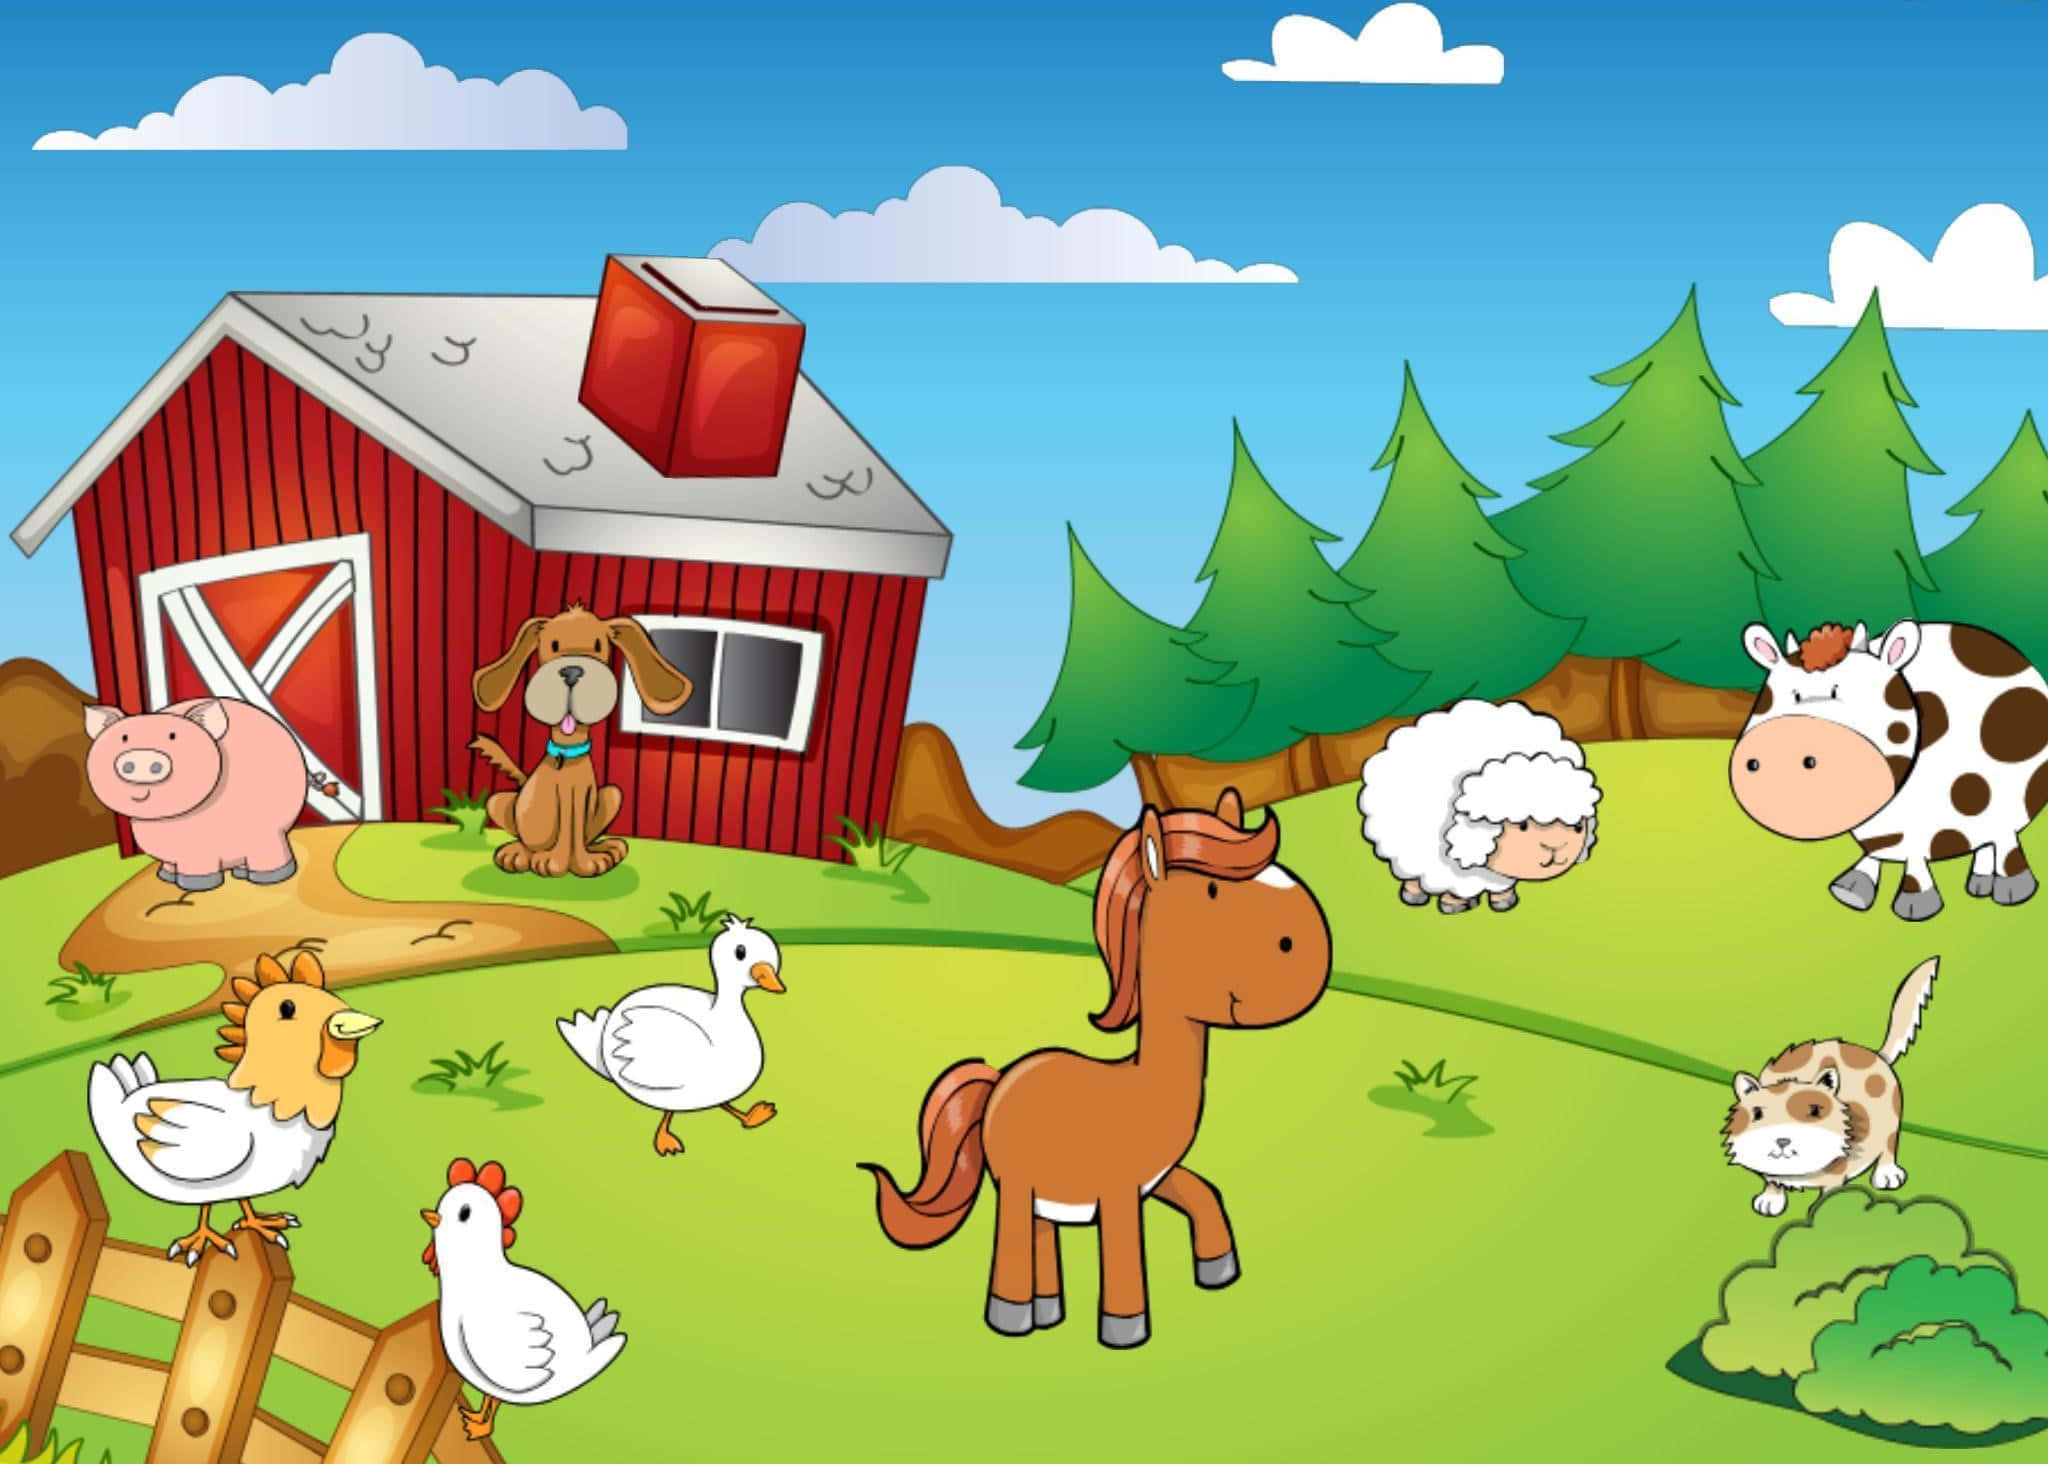 A collection of farm animals peacefully grazing in a lush green meadow